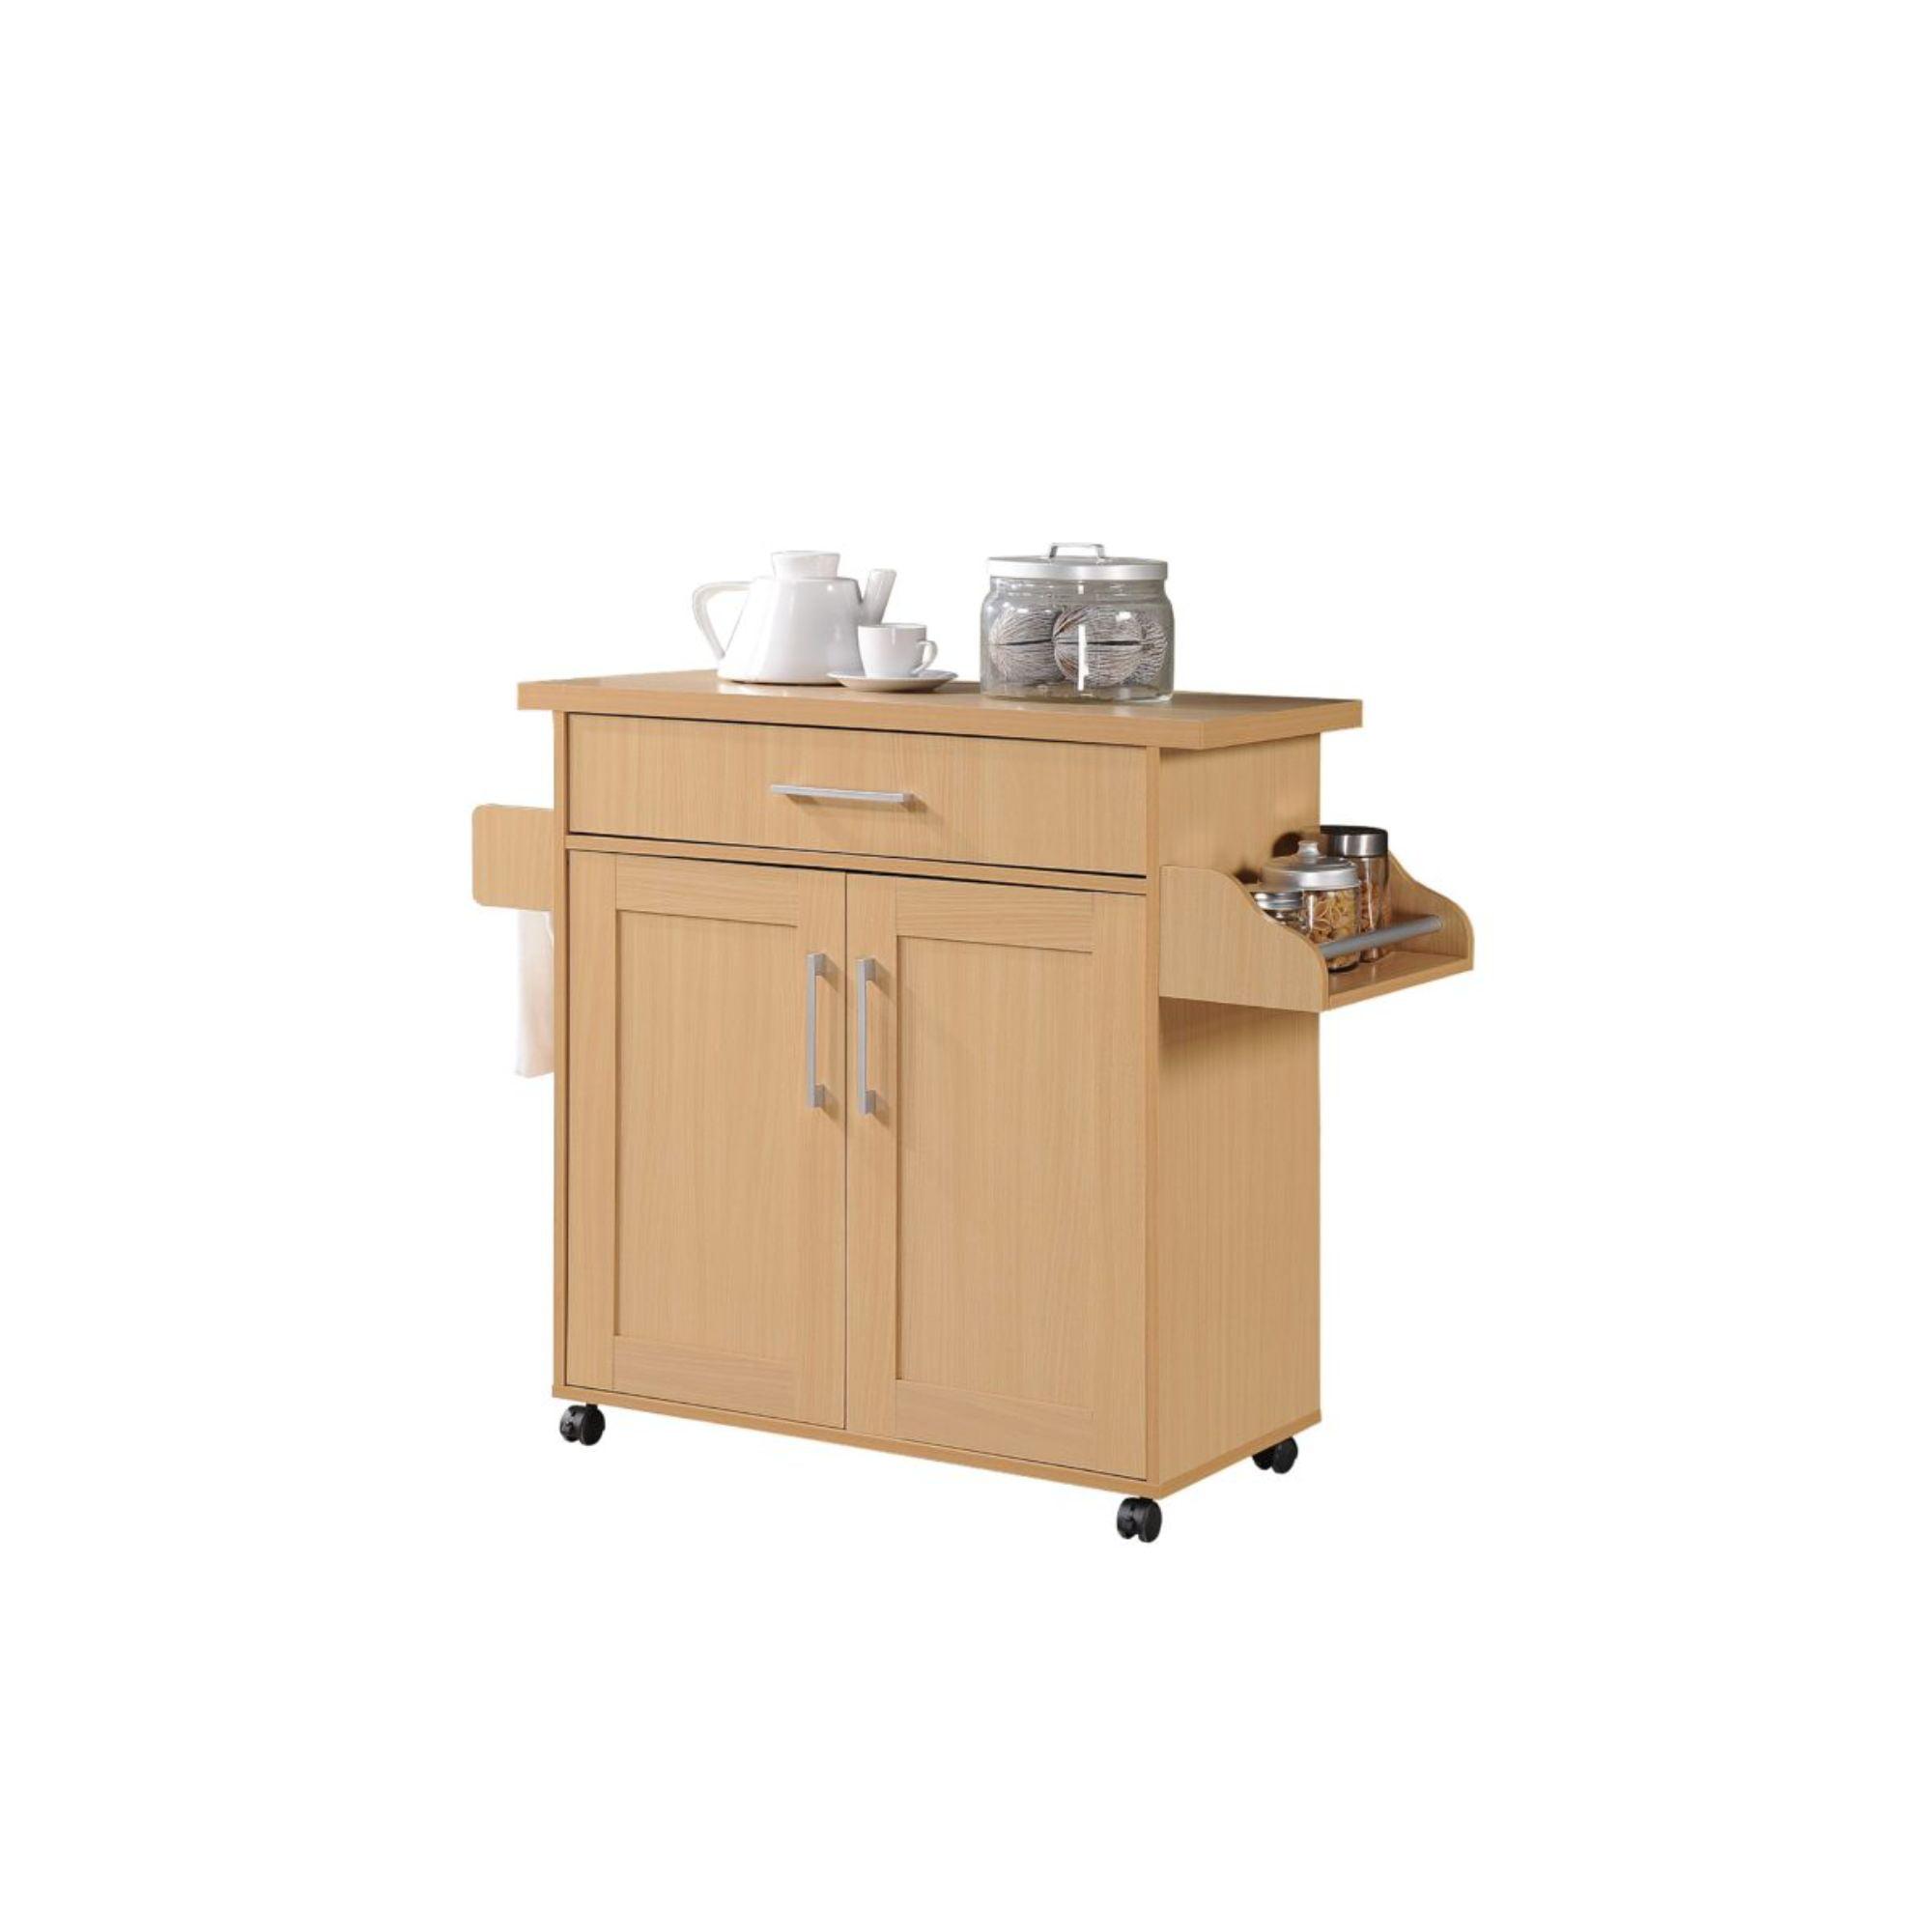 Beige Beechwood 43.7" Kitchen Island with Spice Rack and Towel Holder